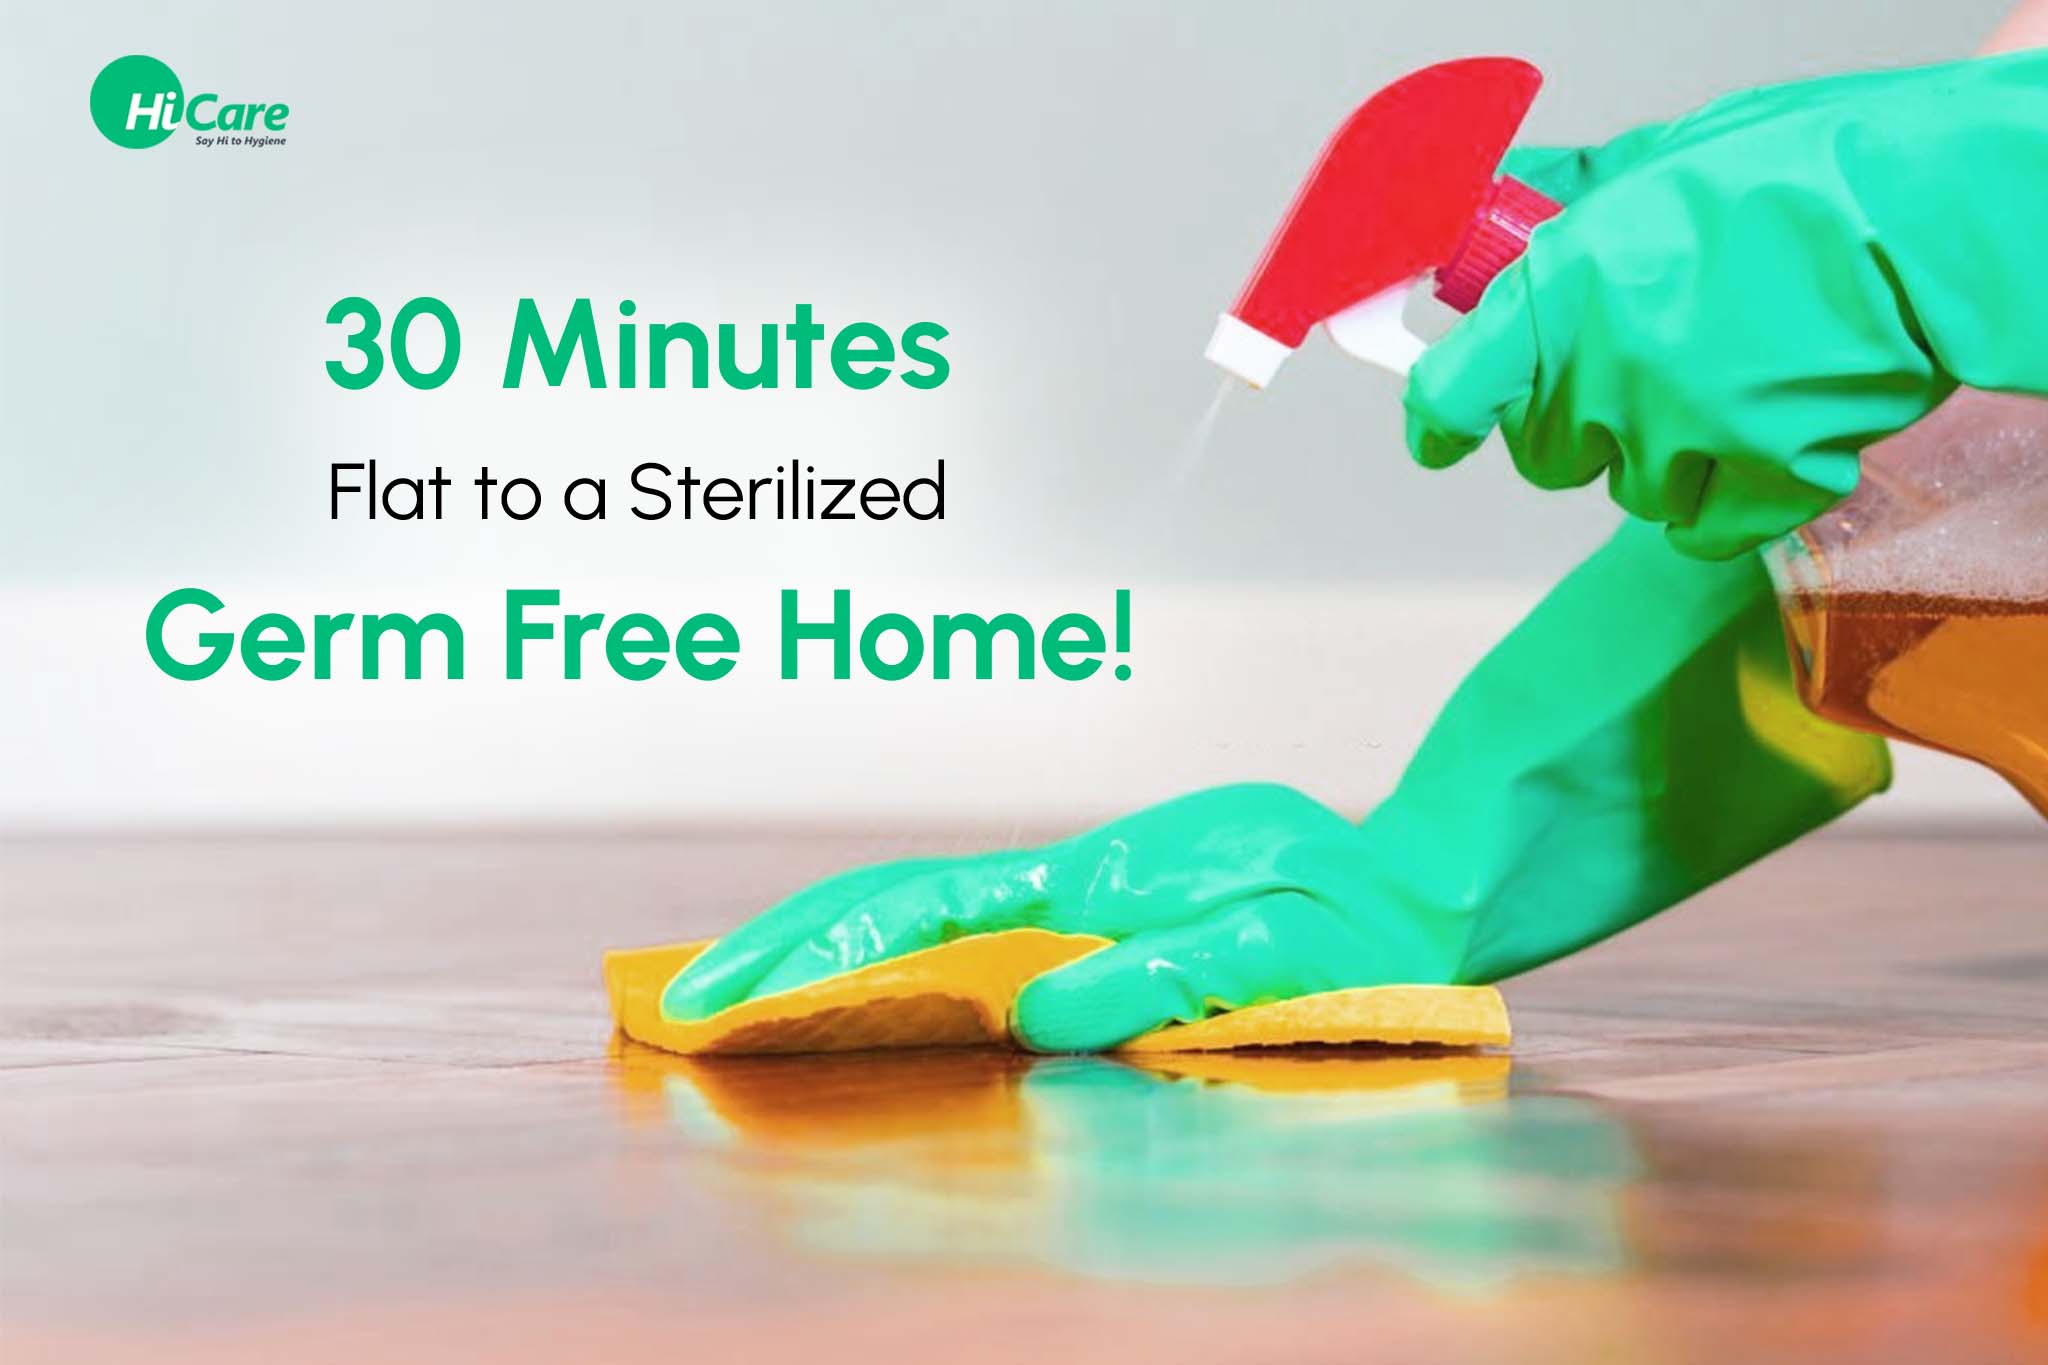 30 minutes flat to a sterilized germ free home